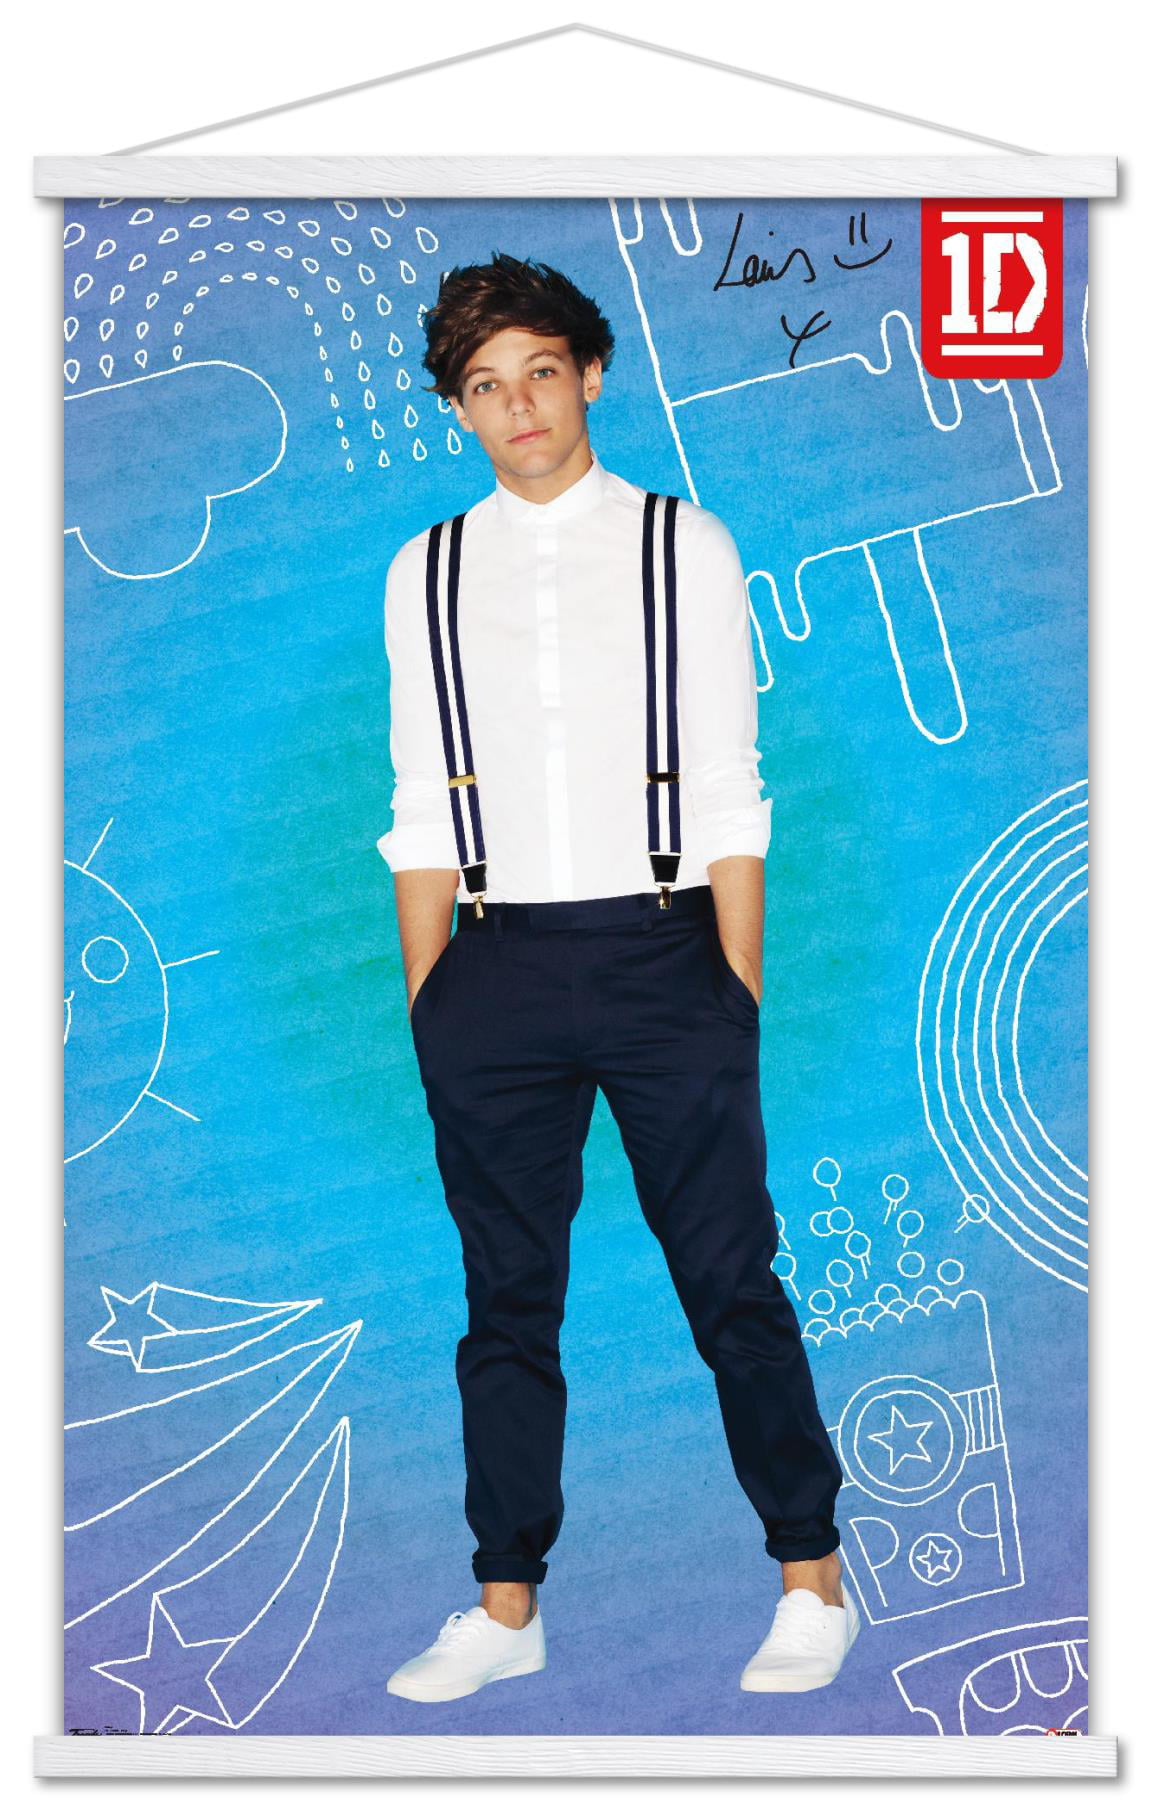 One Direction - Louis Tomlinson - Pop Wall Poster, 14.725 x 22.375,  Framed 